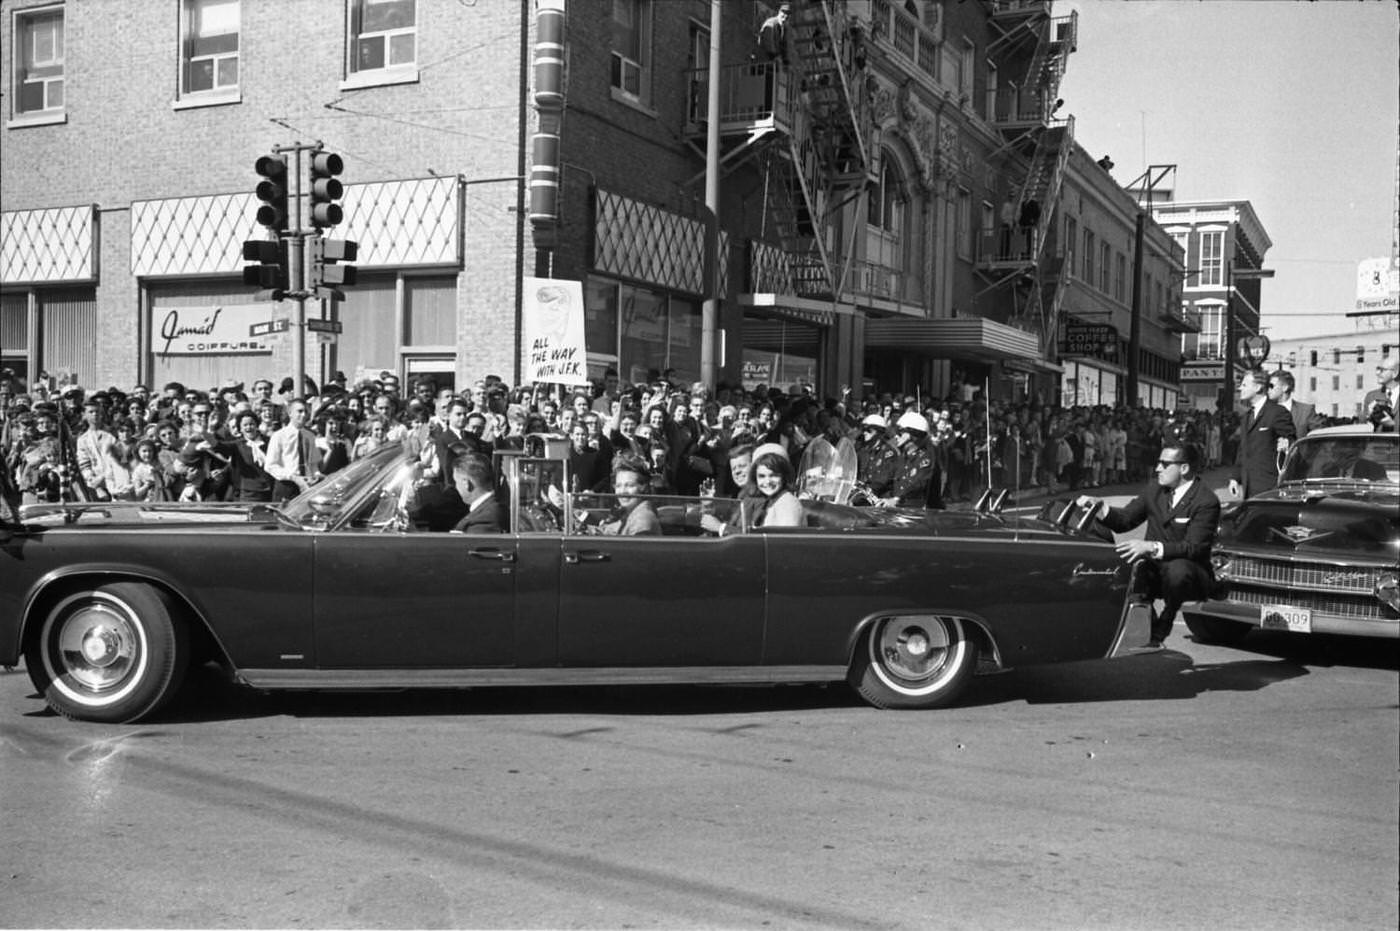 The presidential limousine turning onto main street in downtown Dallas, 1963